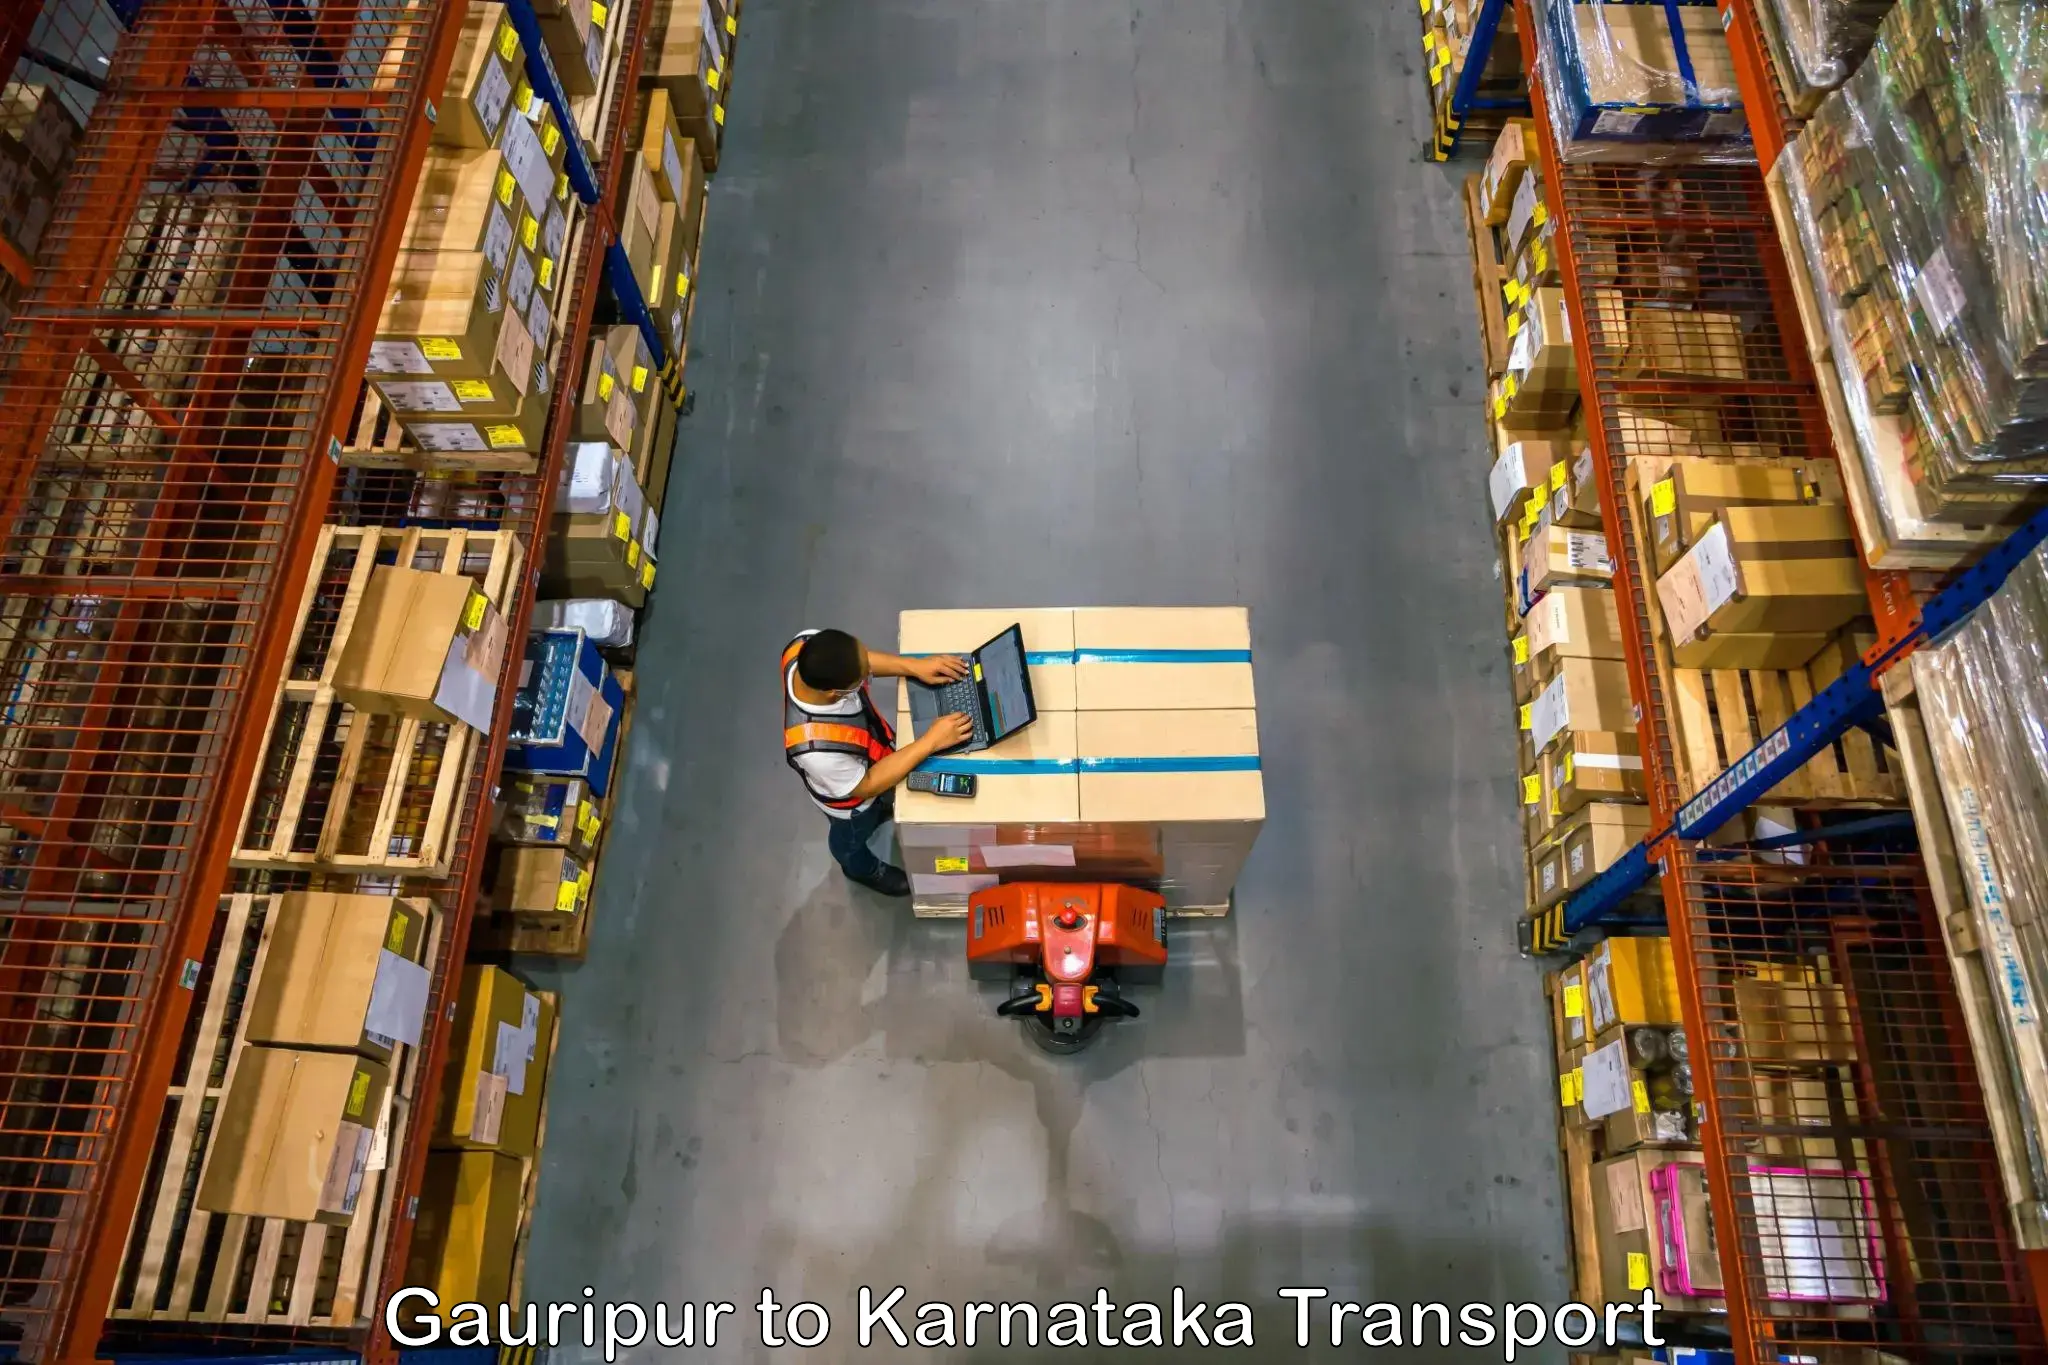 Part load transport service in India in Gauripur to Karnataka